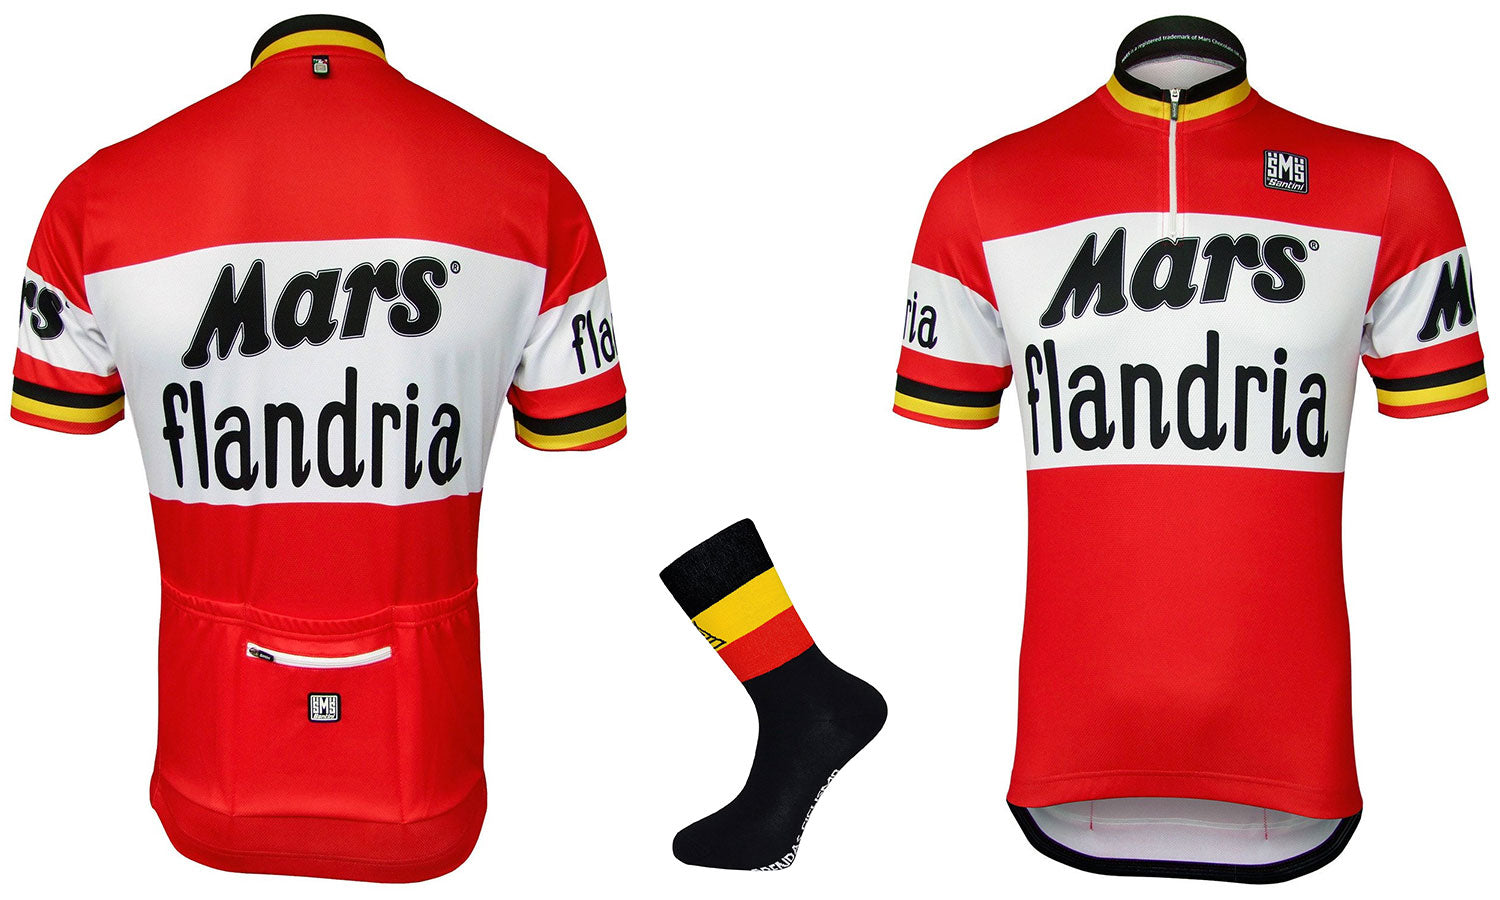 You can buy the Mars Flandria retro cycling jersey and Belgian Champion cycling socks at Prendas Ciclismo.